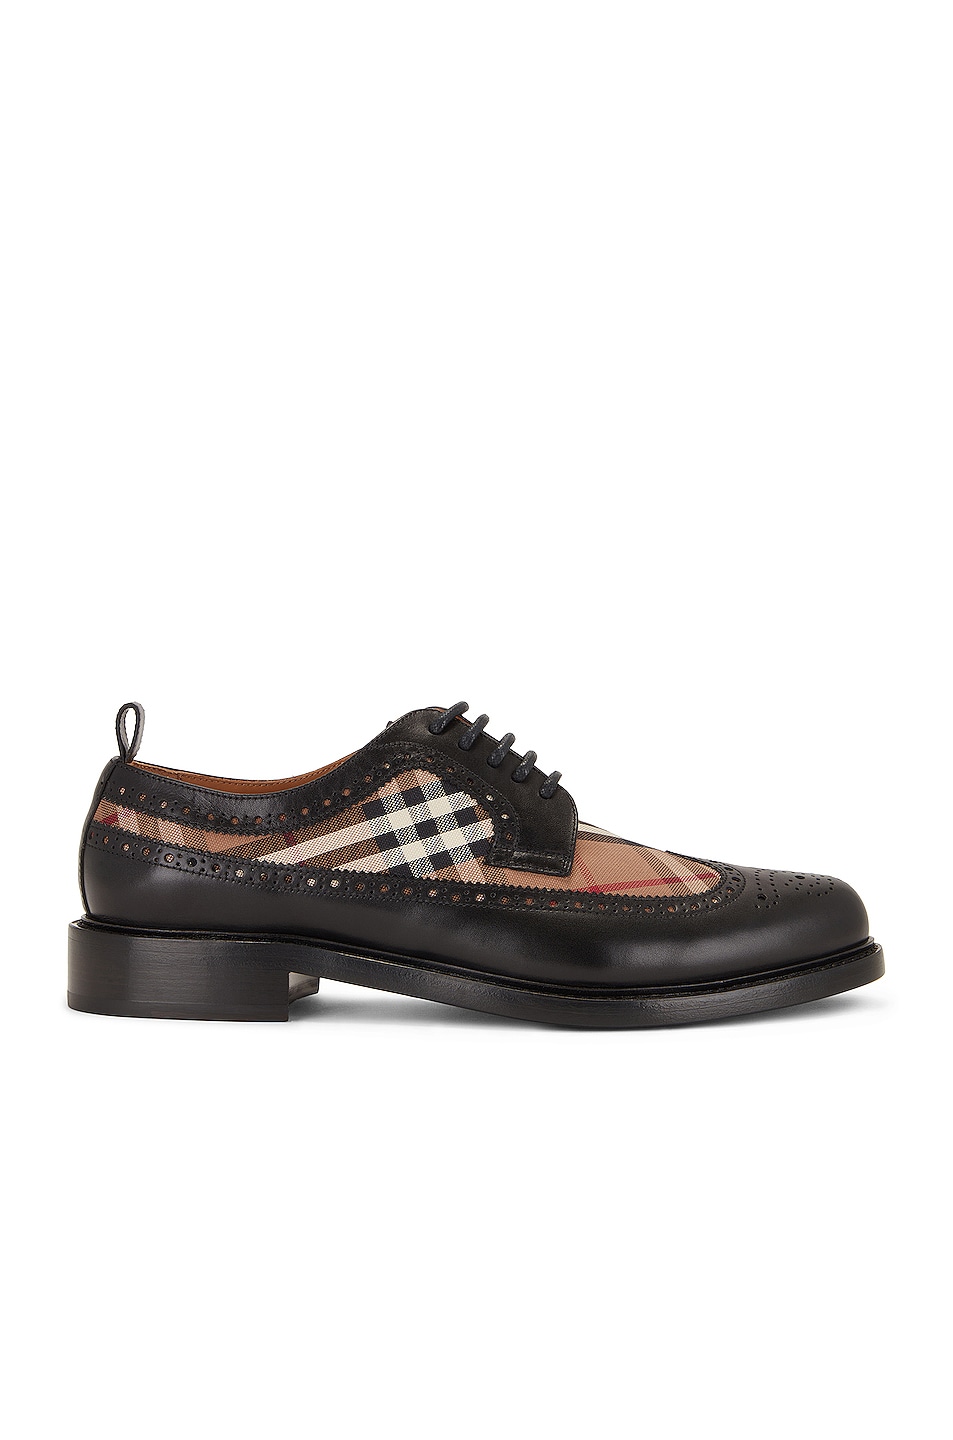 Image 1 of Burberry Arndale Check Formal Shoe in Black & Birch